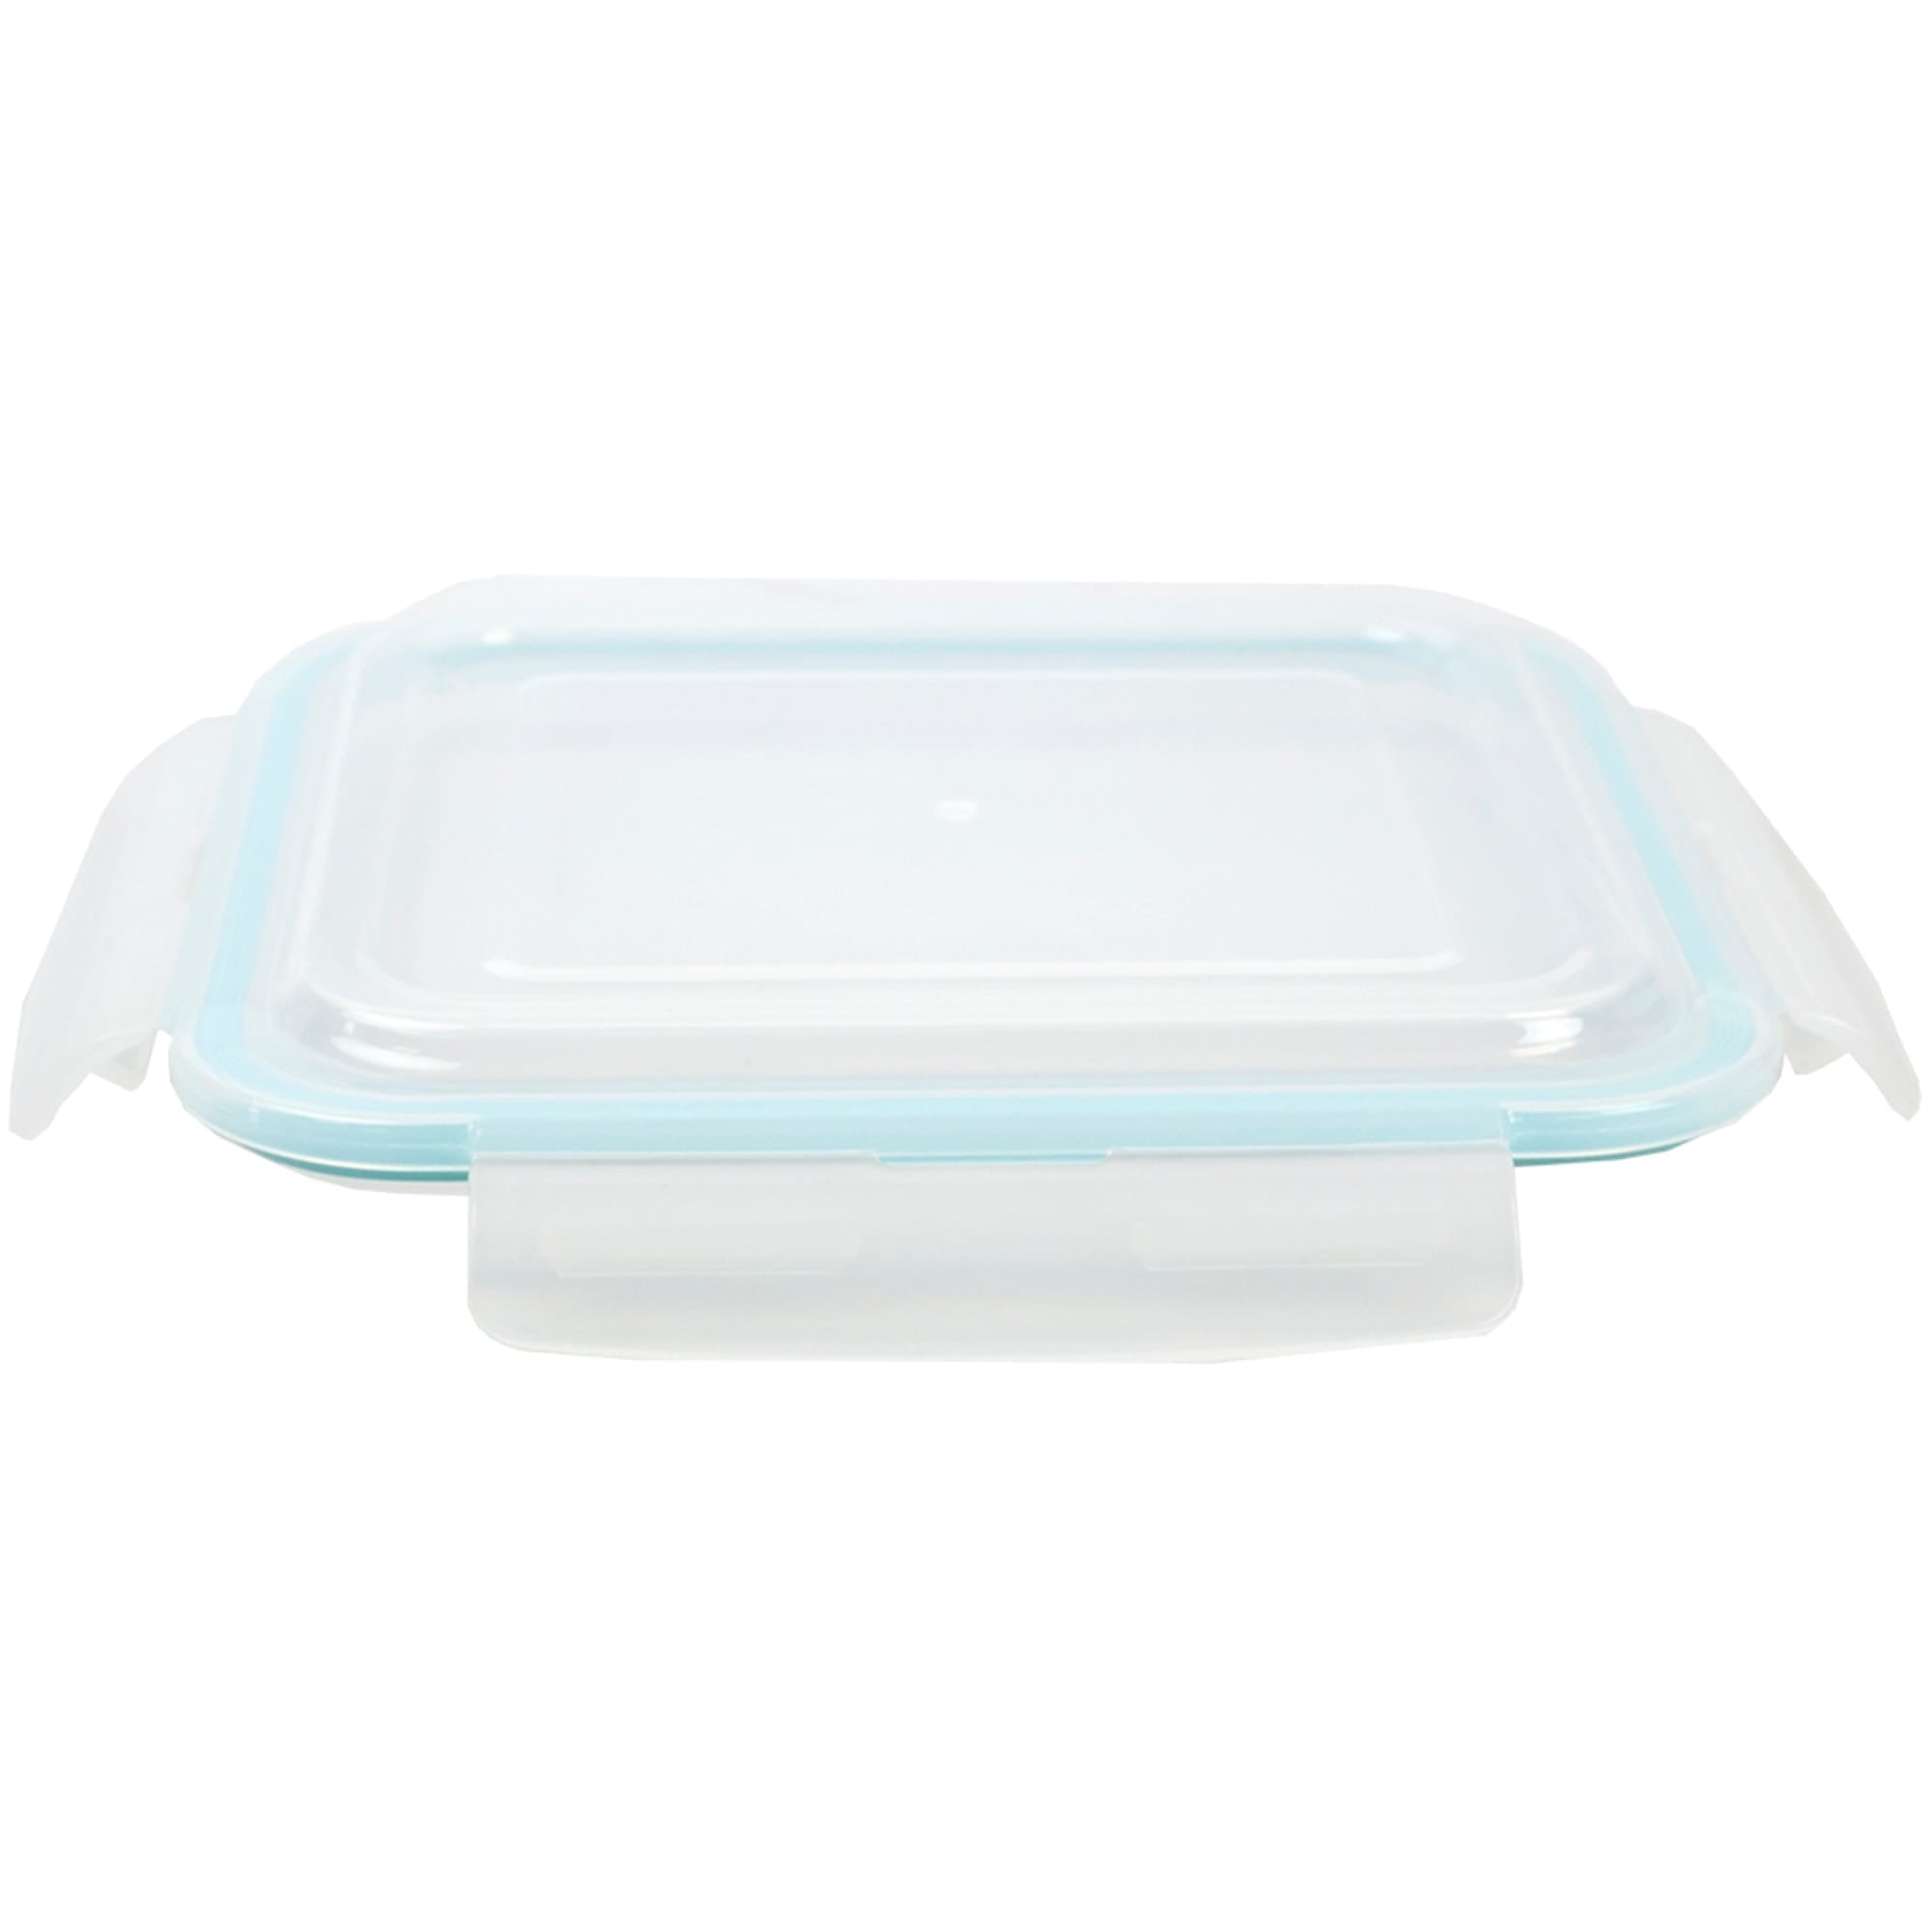 Home Basics 74 oz. Square Borosilicate Glass Food Storage Container with Leak-Proof and Air-Tight Plastic Locking Lid $8.00 EACH, CASE PACK OF 12